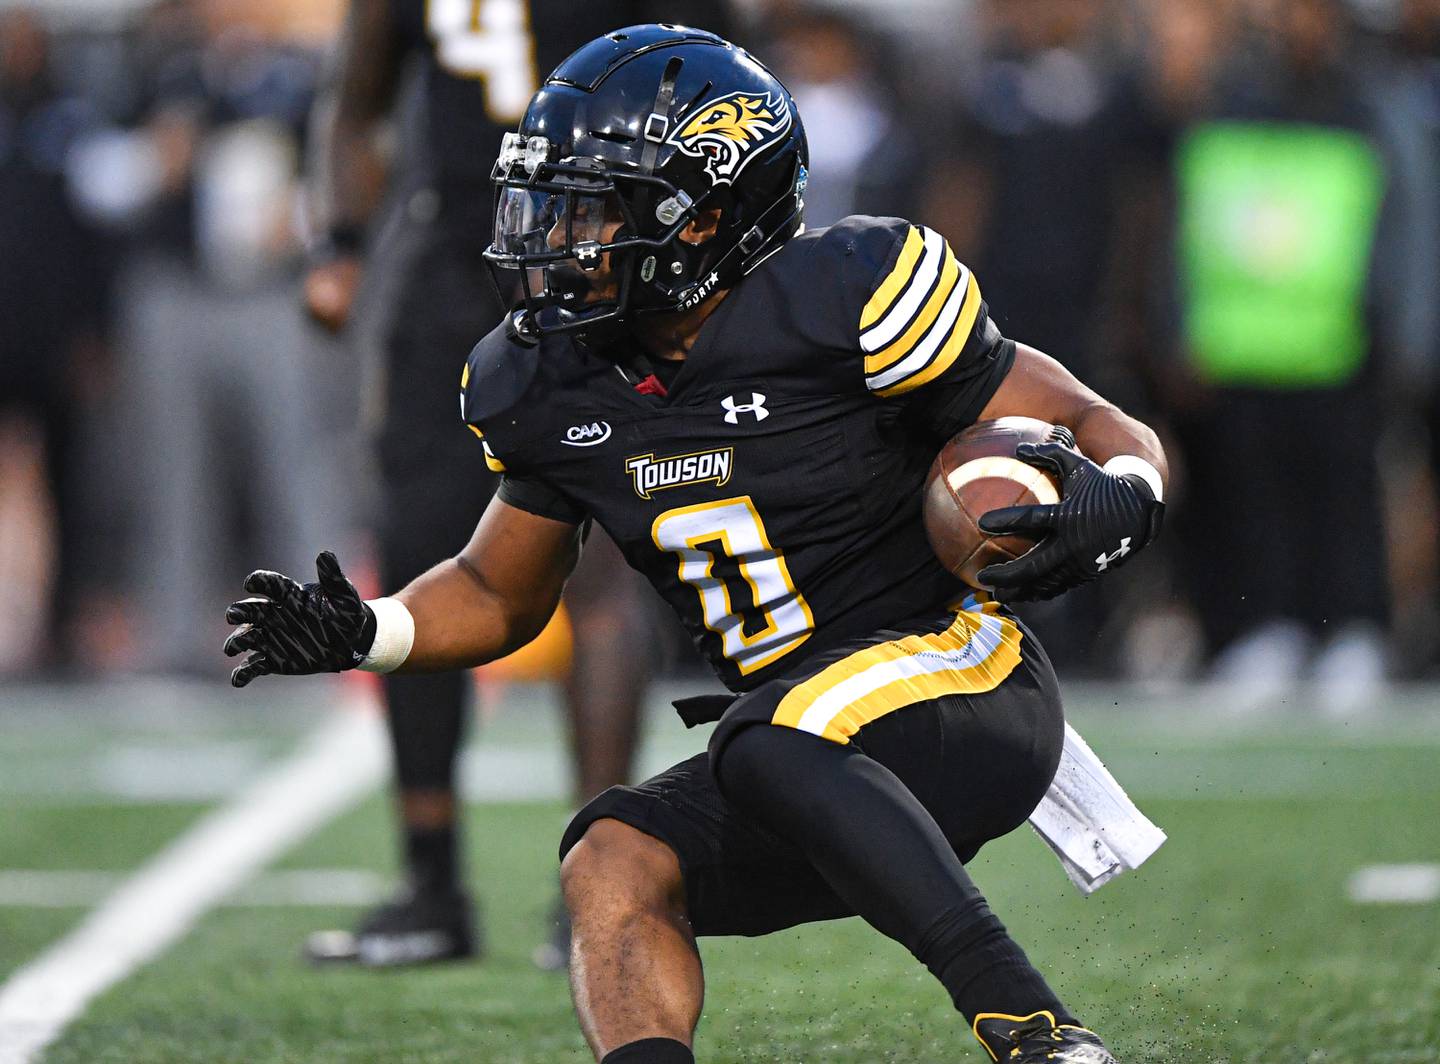 Towson’s D’Ago Hunter is one of the most electrifying talents in all of college football